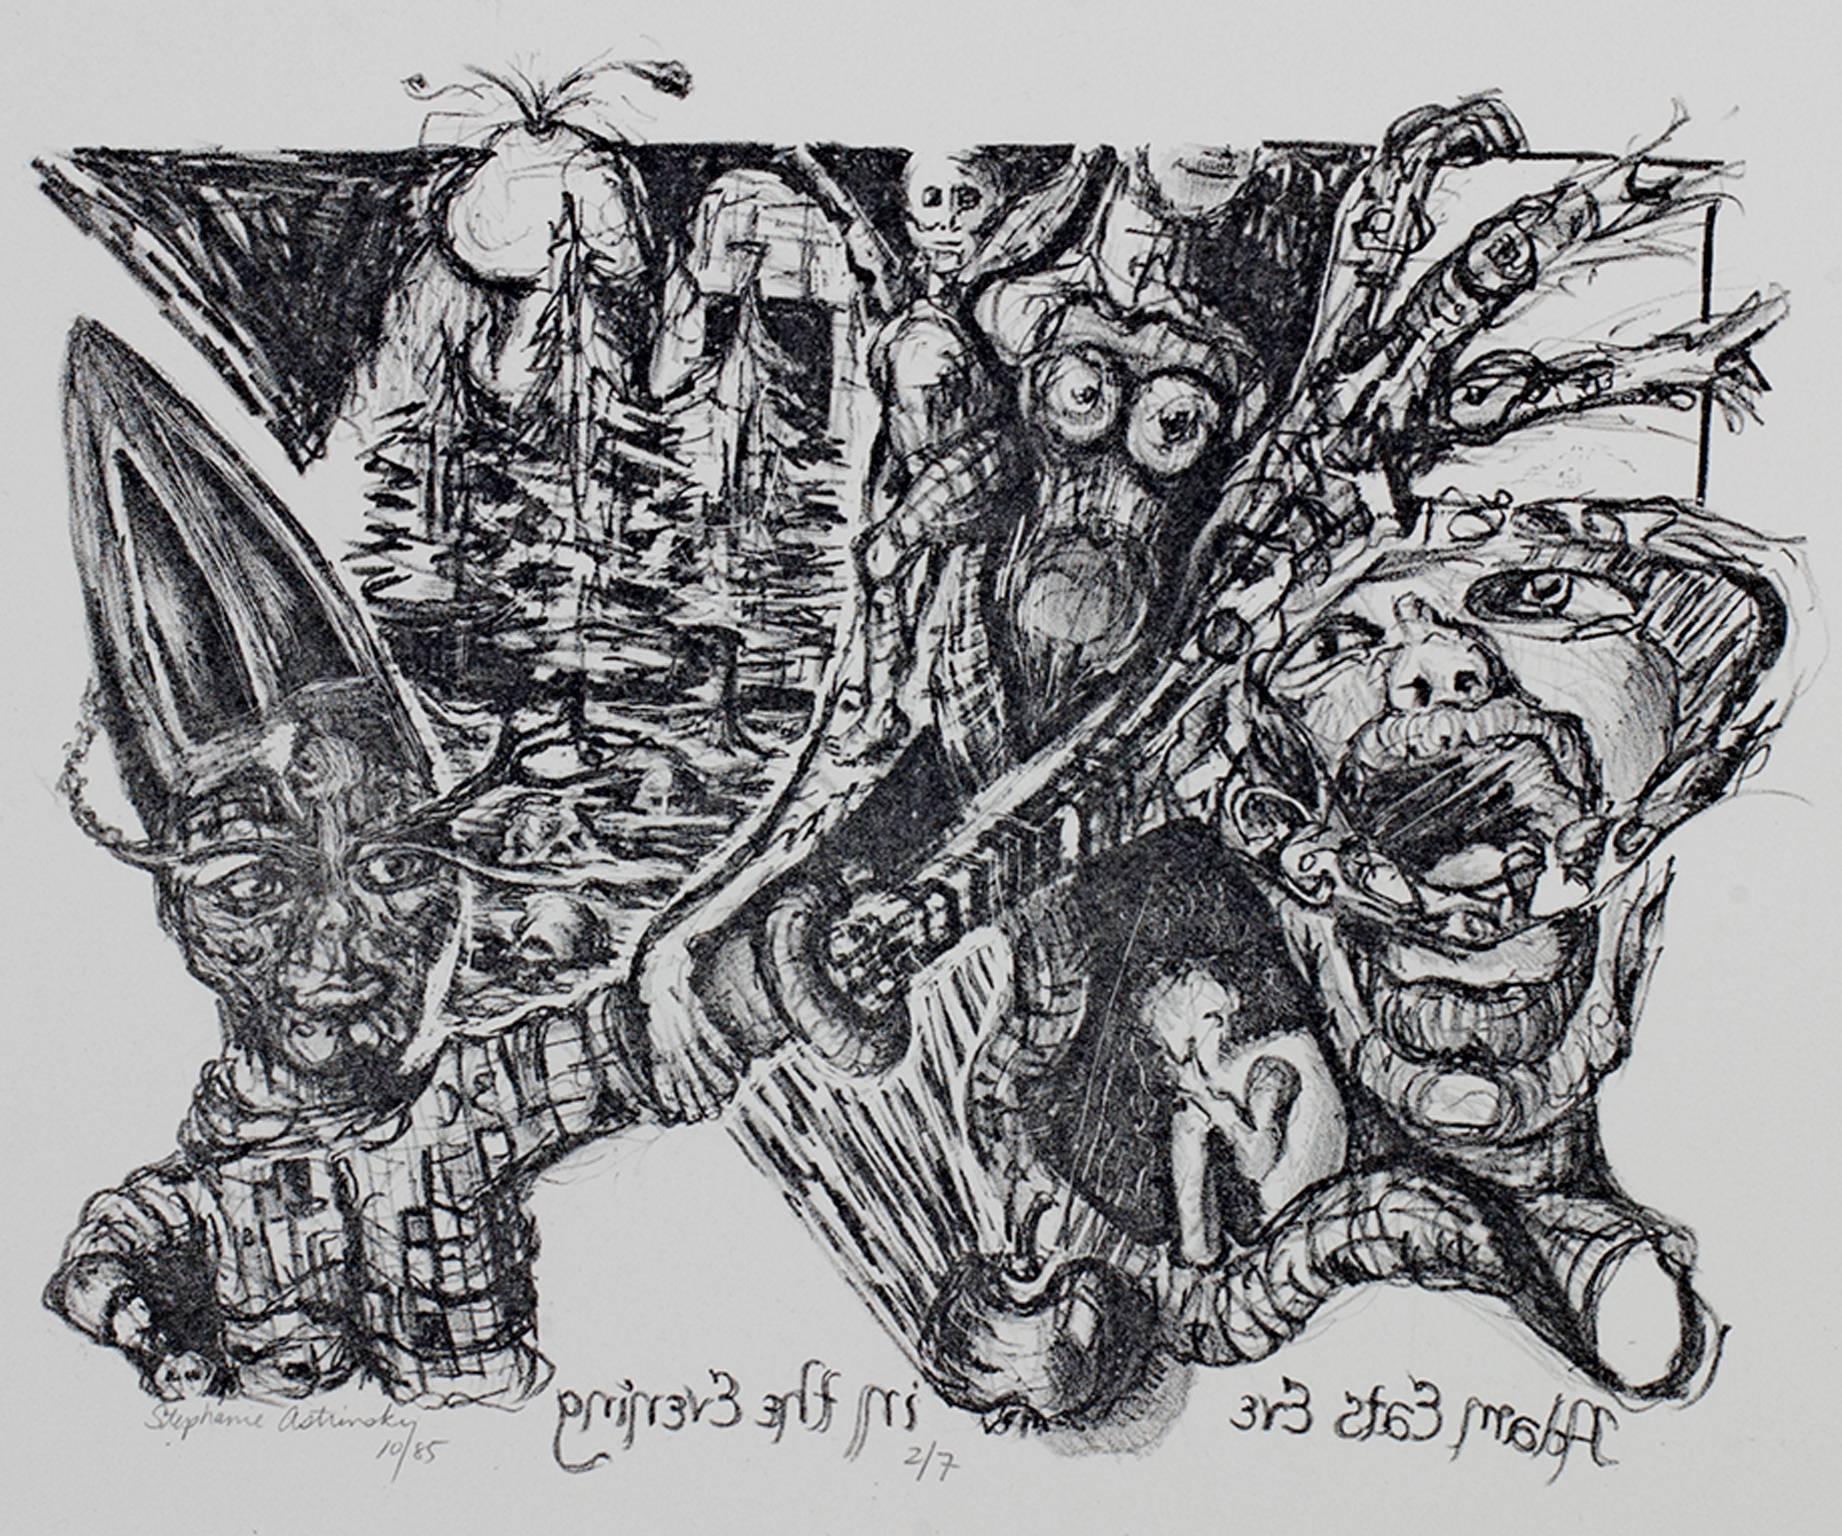 "Adam Eats Eve in the Evening" is an original black and white lithograph by Stephane Astrinsky. This surreal lithograph evokes a biblical story as well as elements of horror. 

9 1/4" x 11 1/2" art
19 3/8" x 23 3/8" frame